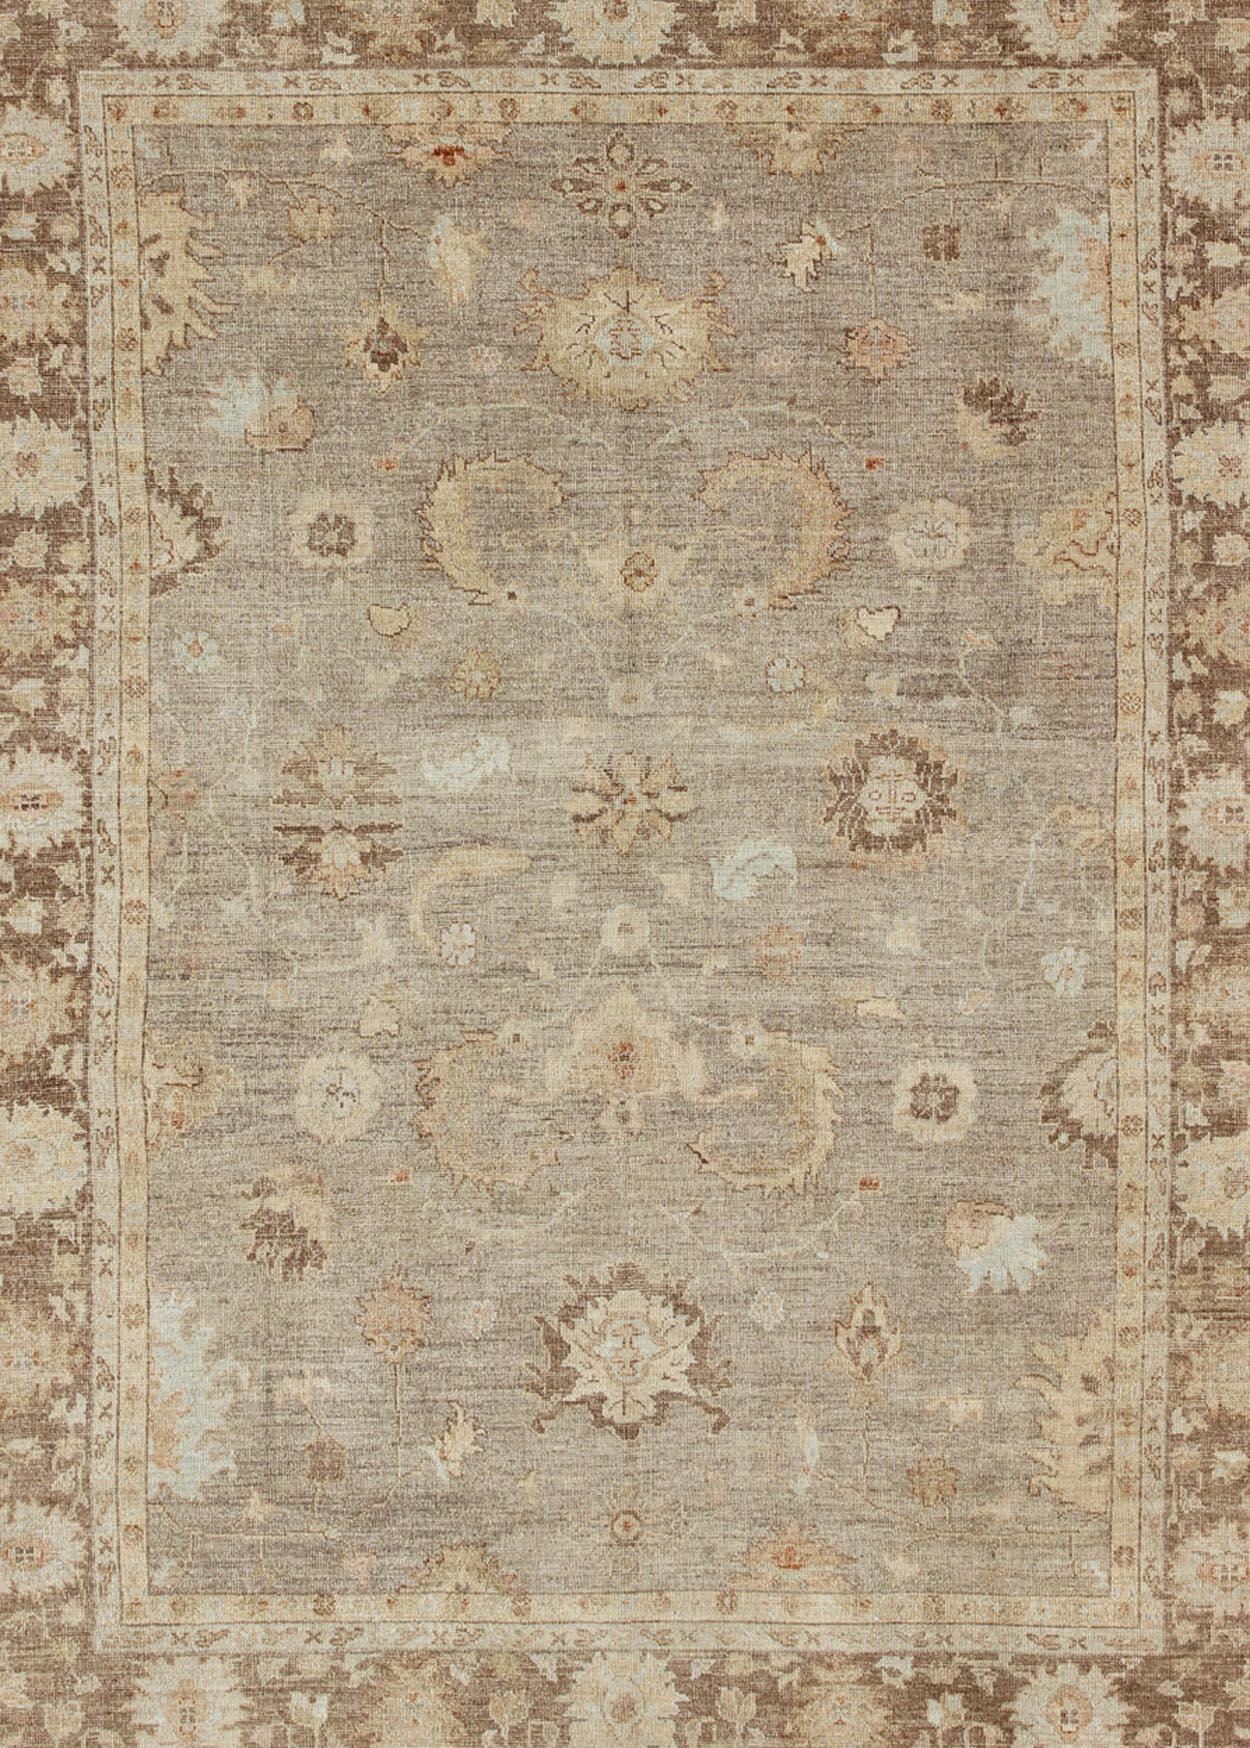 Angora Oushak Turkish rug in warm colors of taupe, gray, brown, cream, Angora Oushak rug from Turkey, rug AN-108396, country of origin / type: Turkey / Angora Oushak.

This beautiful neutral color oushak is made with a combination of angora and old